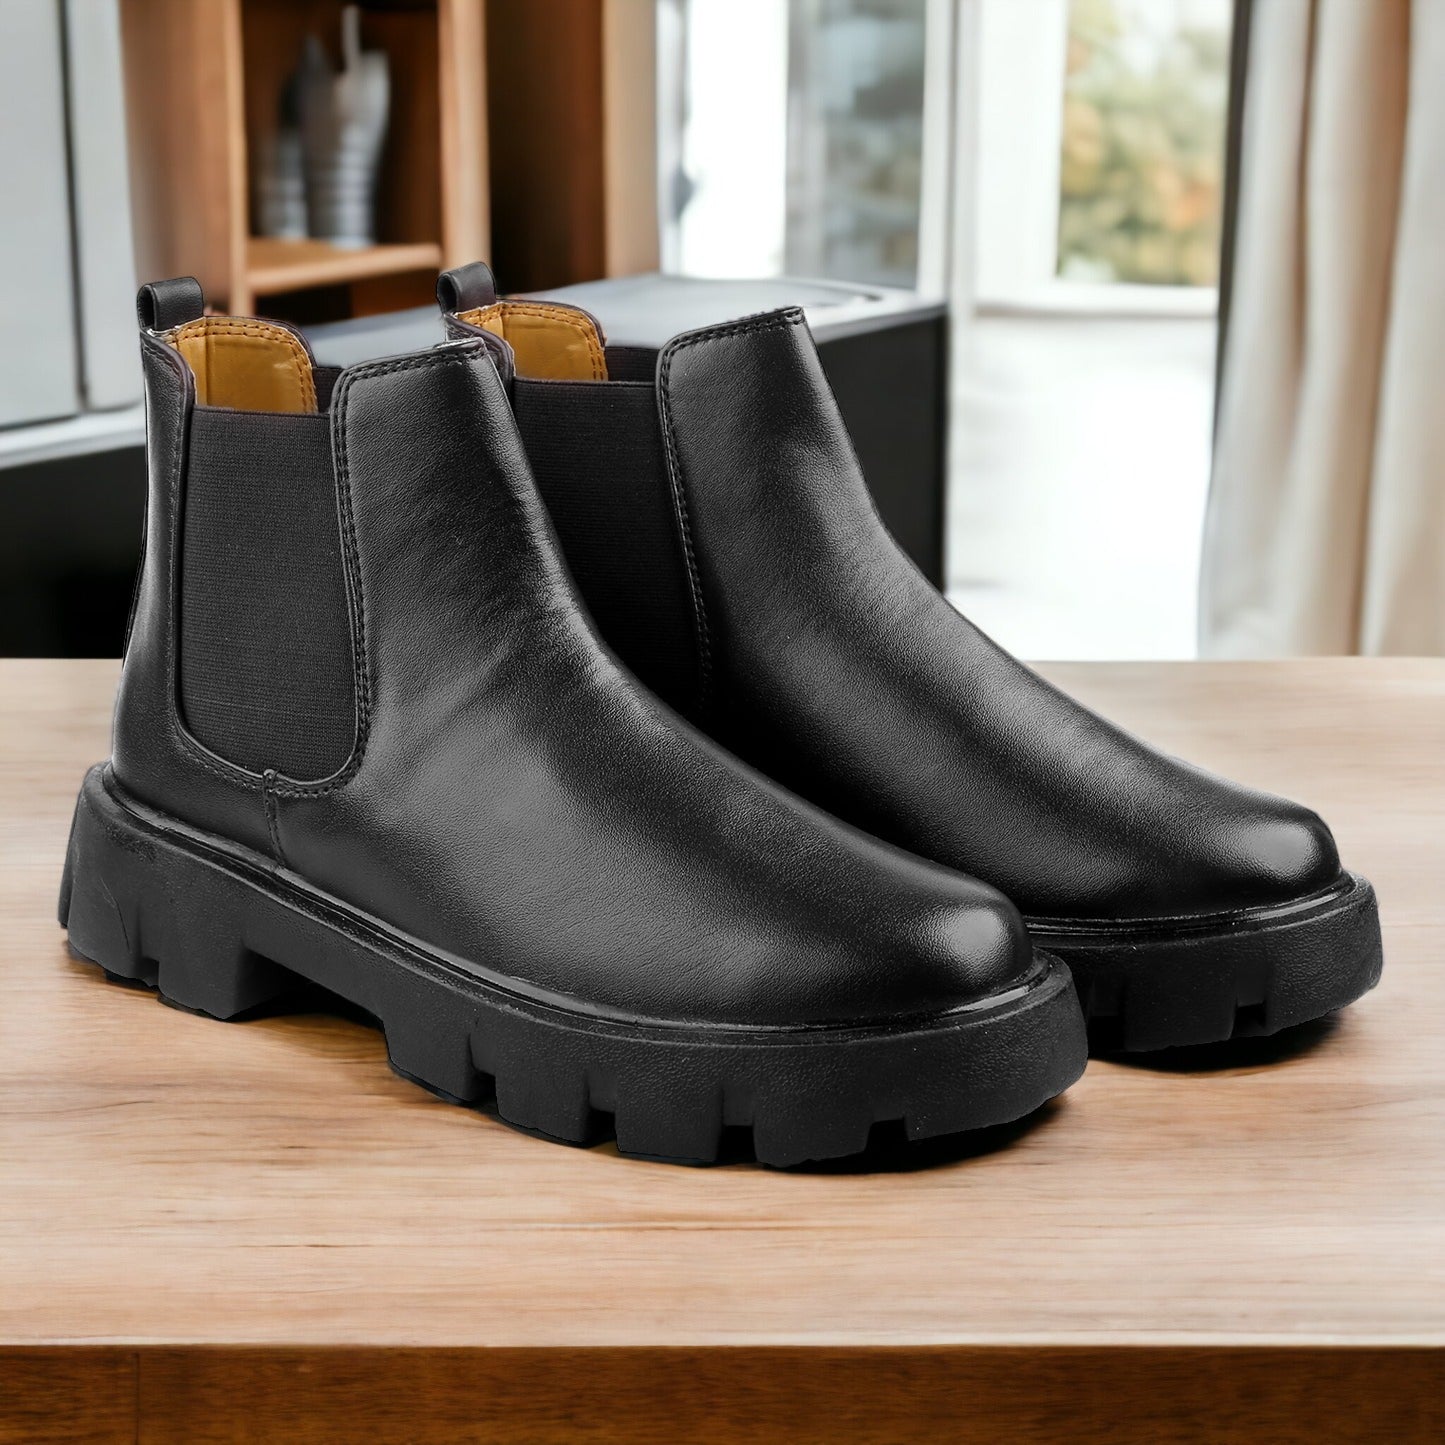 Jack Marc Men's Black Pu Material Casual Chelsea and Ankle Boots